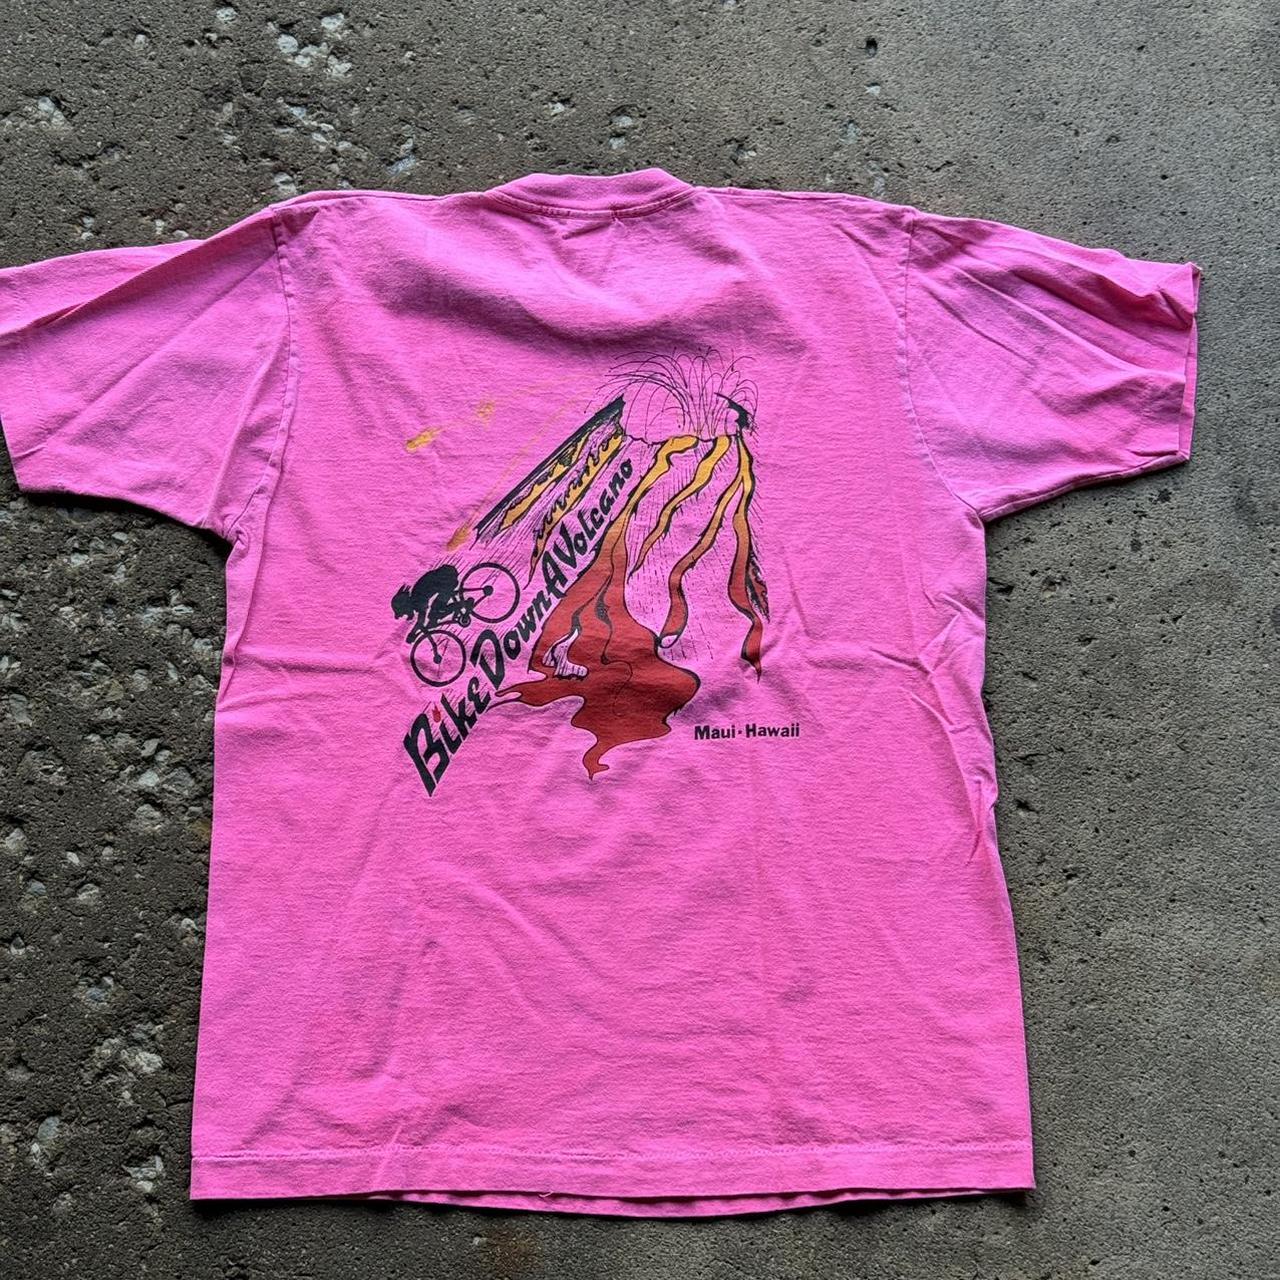 Vintage Maui Pink Graphic Tee No stains or... - Depop